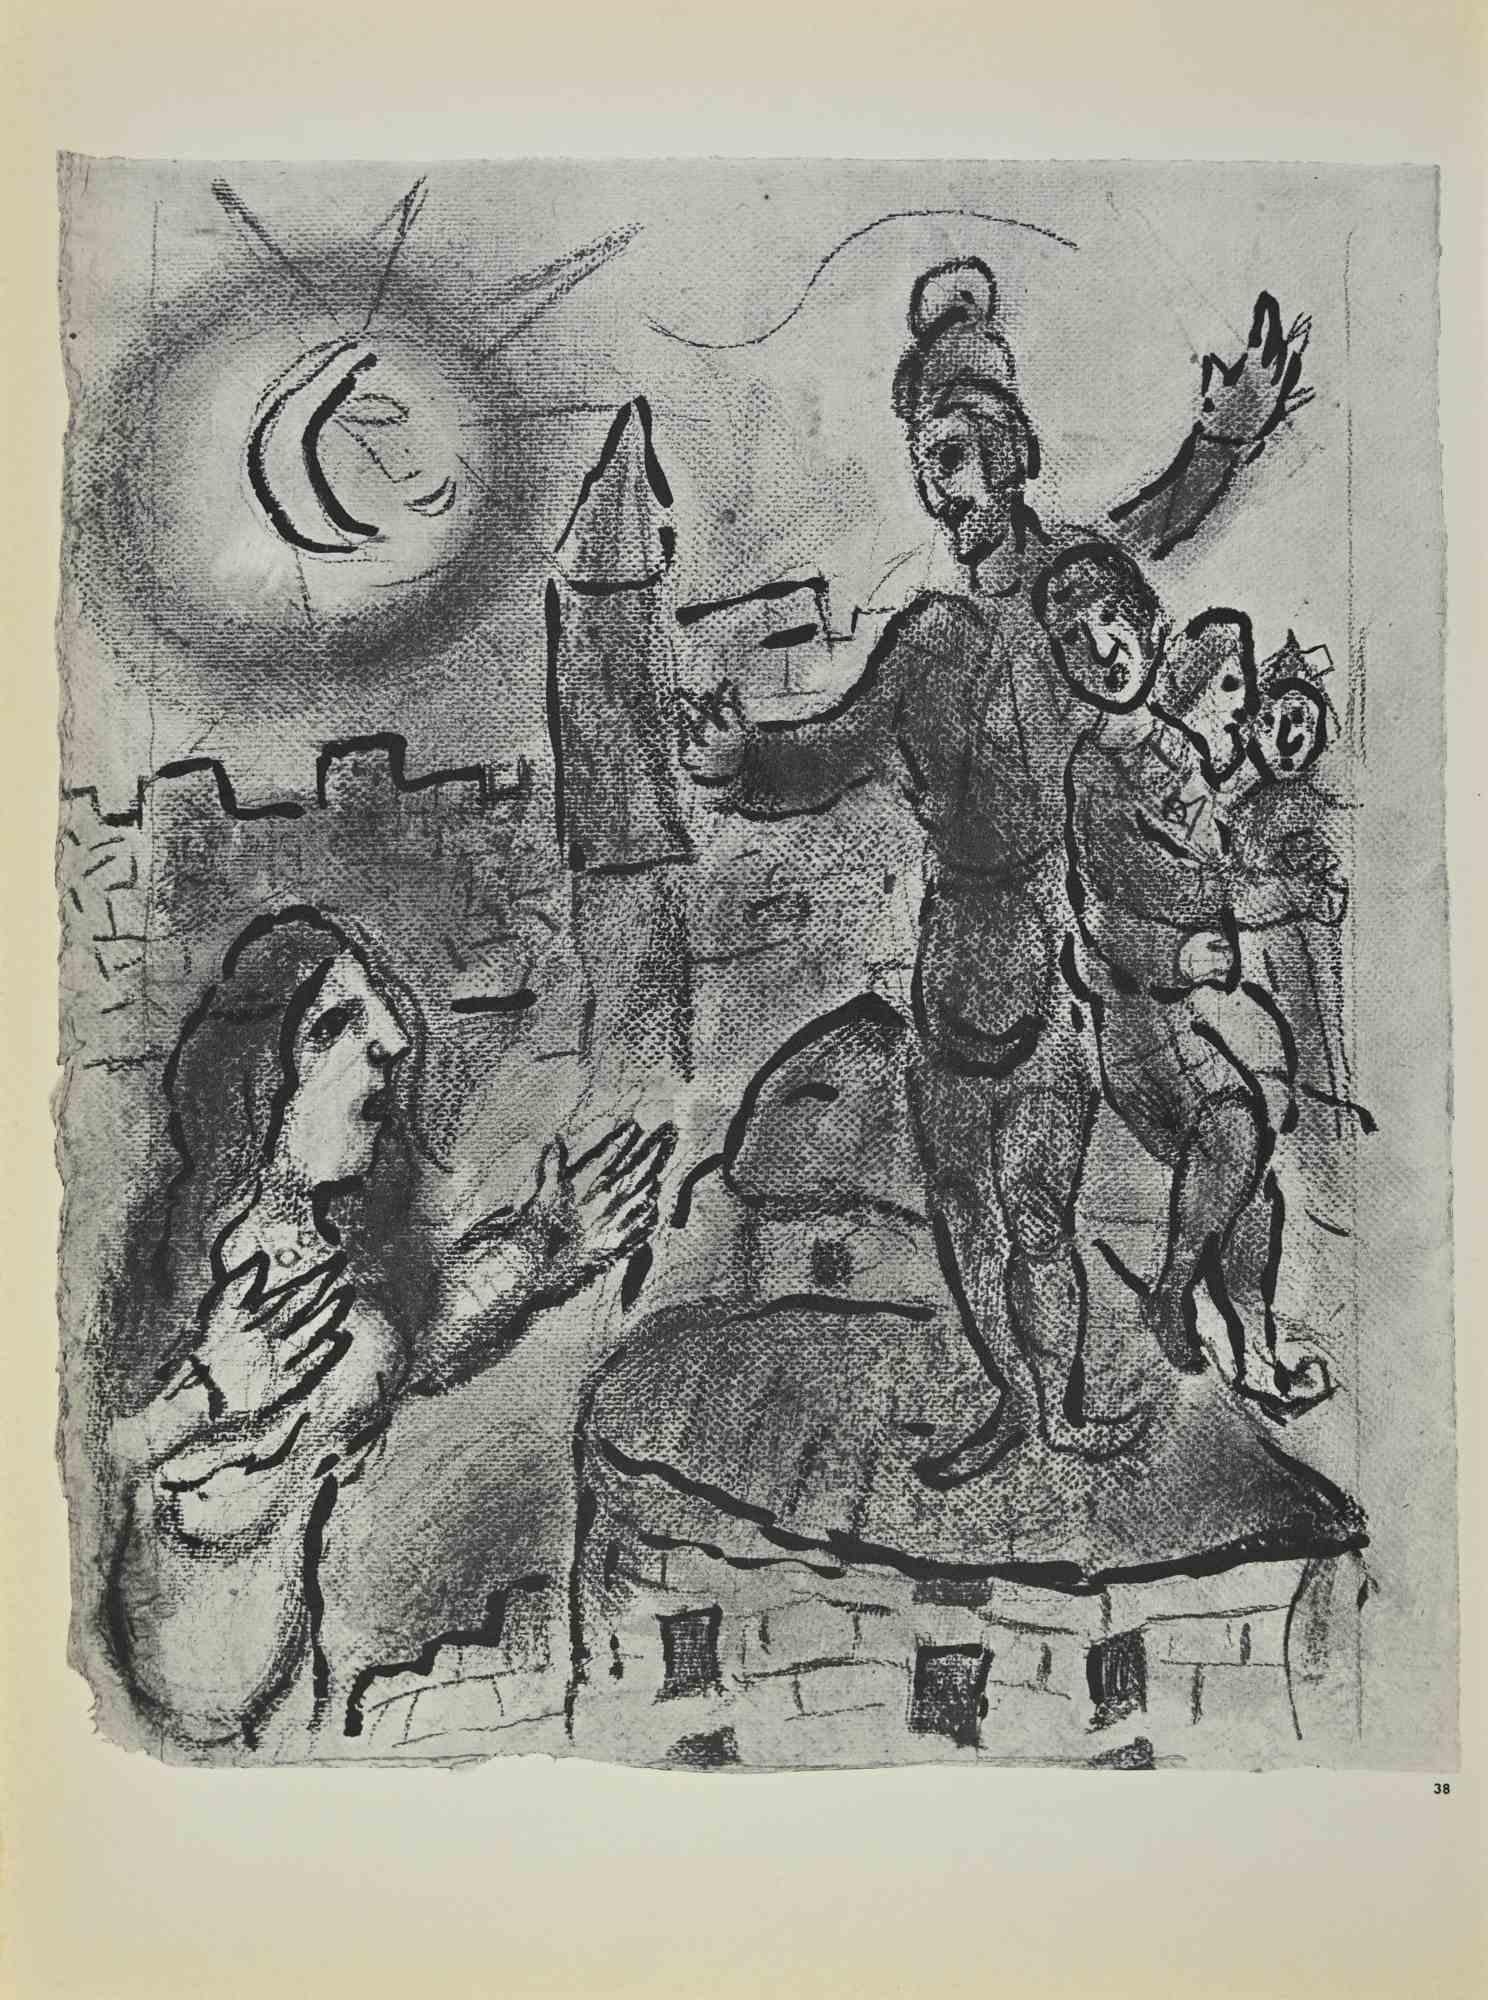 Acrobate  is an artwork realized by March Chagall, 1960s.

Lithograph on brown-toned paper, no signature.

Lithograph on both sheets.

Edition of 6500 unsigned lithographs. Printed by Mourlot and published by Tériade, Paris.

Ref. Mourlot, F.,